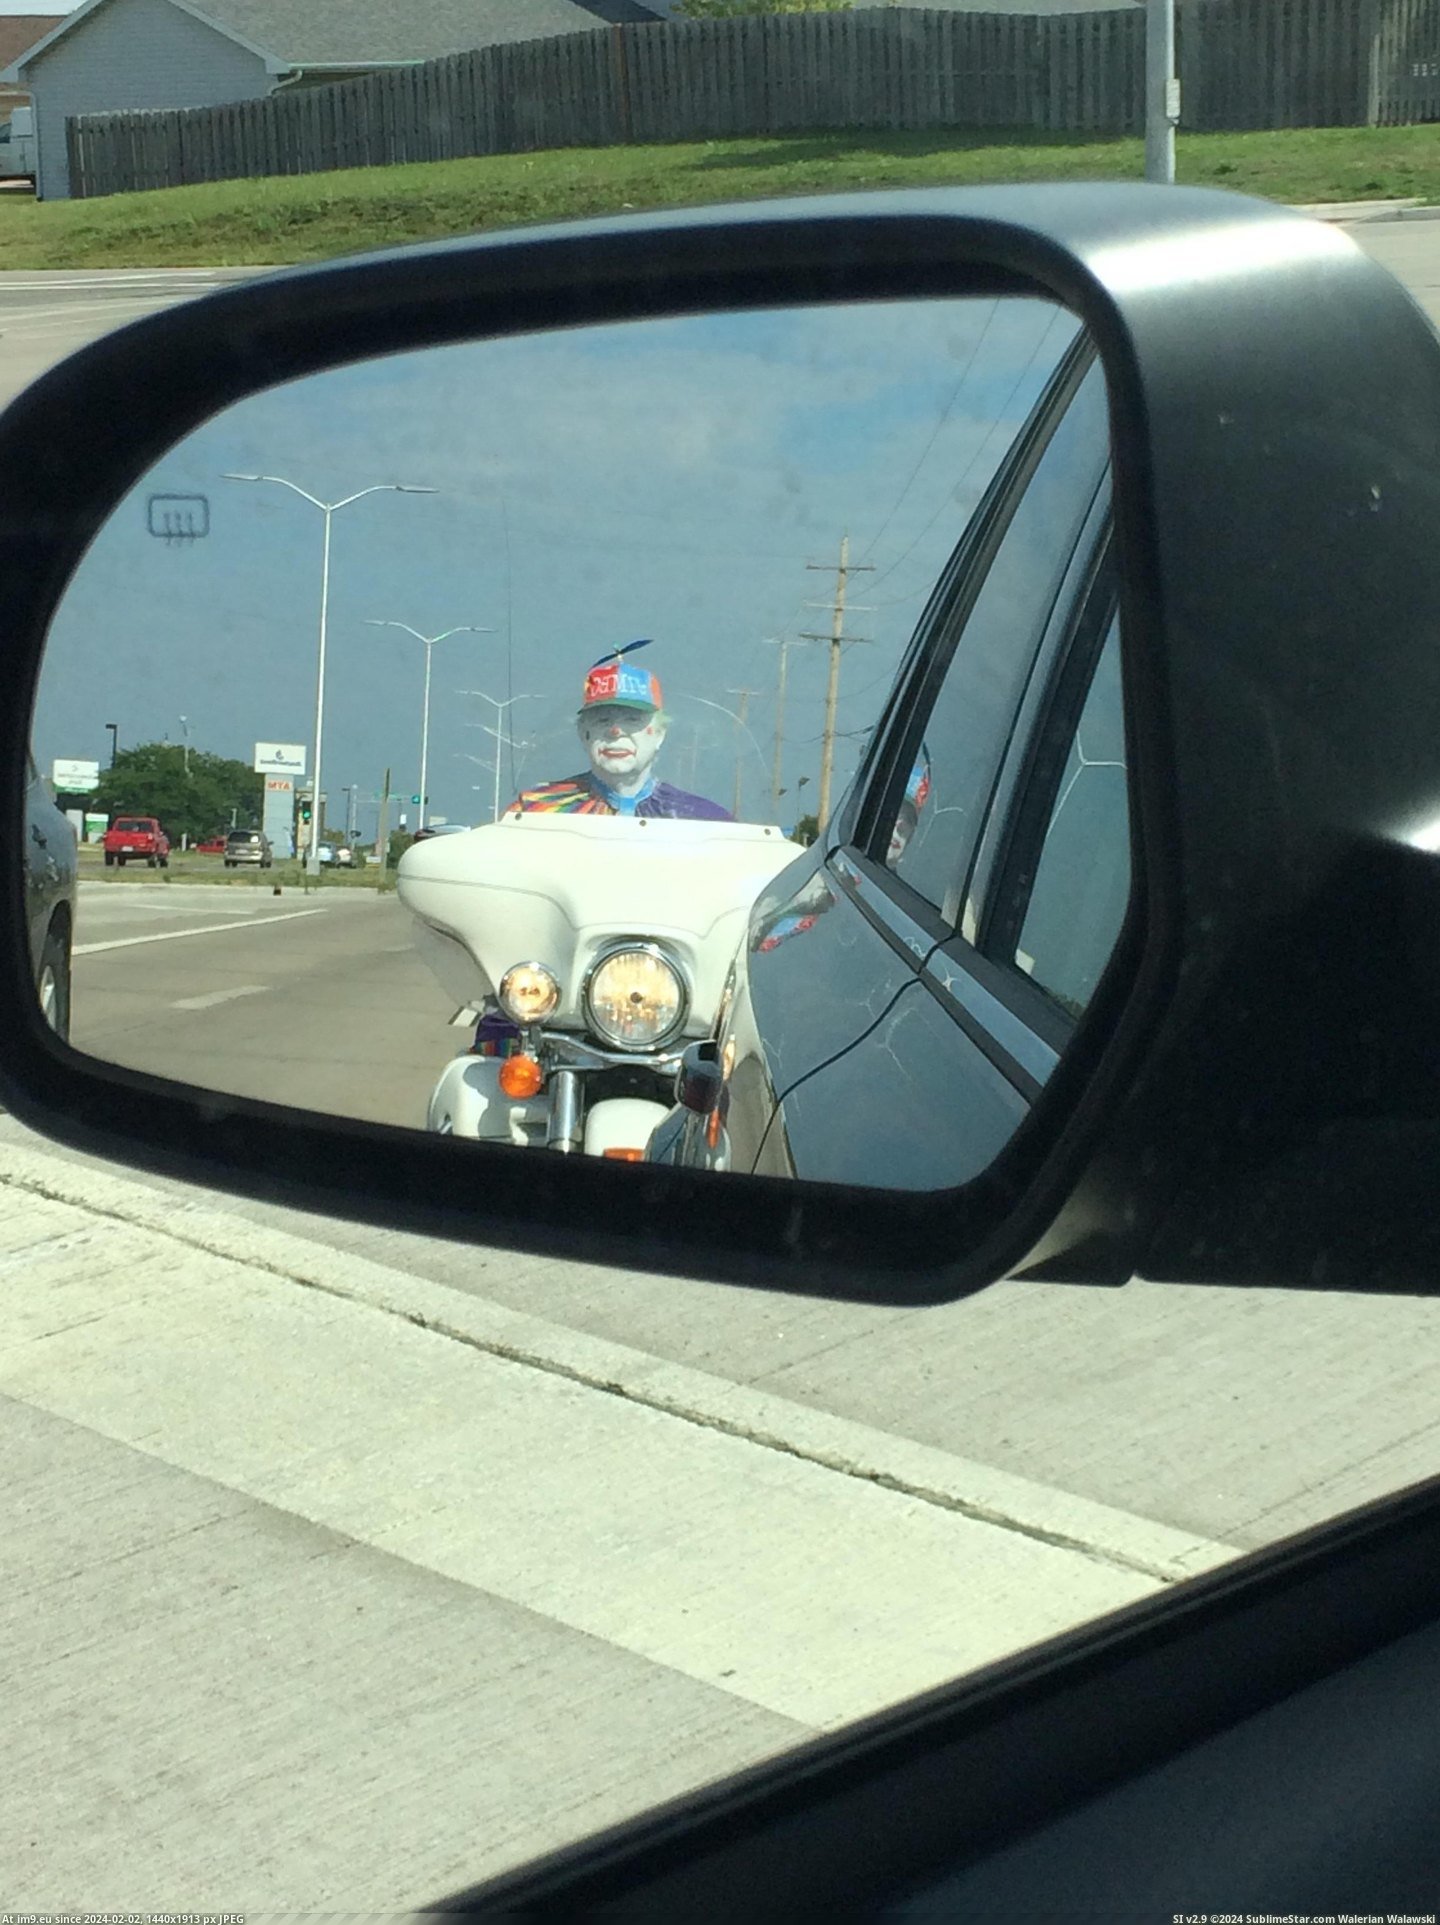 #Wtf #Expect #Rear [Wtf] Didn't expect this in the rear view Pic. (Изображение из альбом My r/WTF favs))